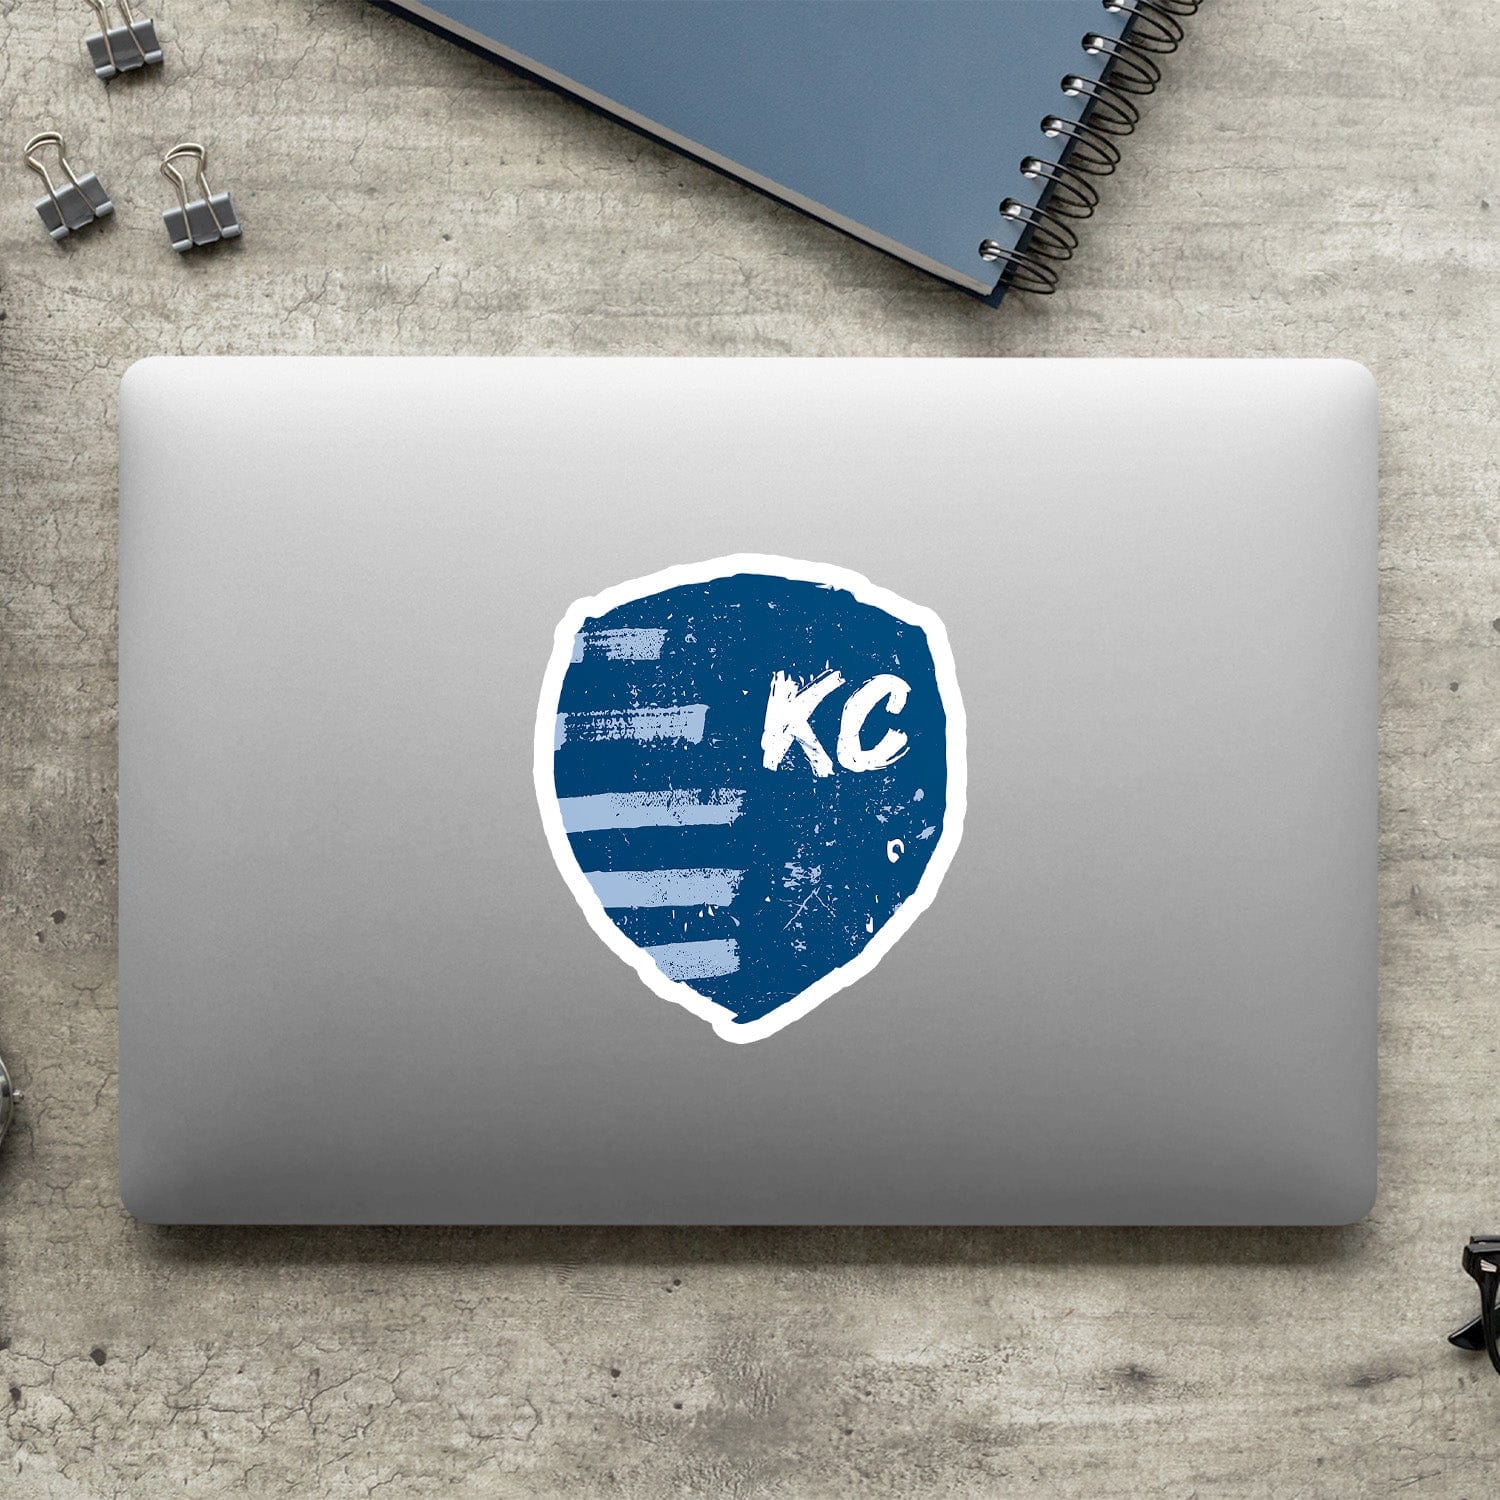 KC Swag Sporting Kansas City powder, navy, white Painted Shield vinyl die cut decal sticker on closed laptop back